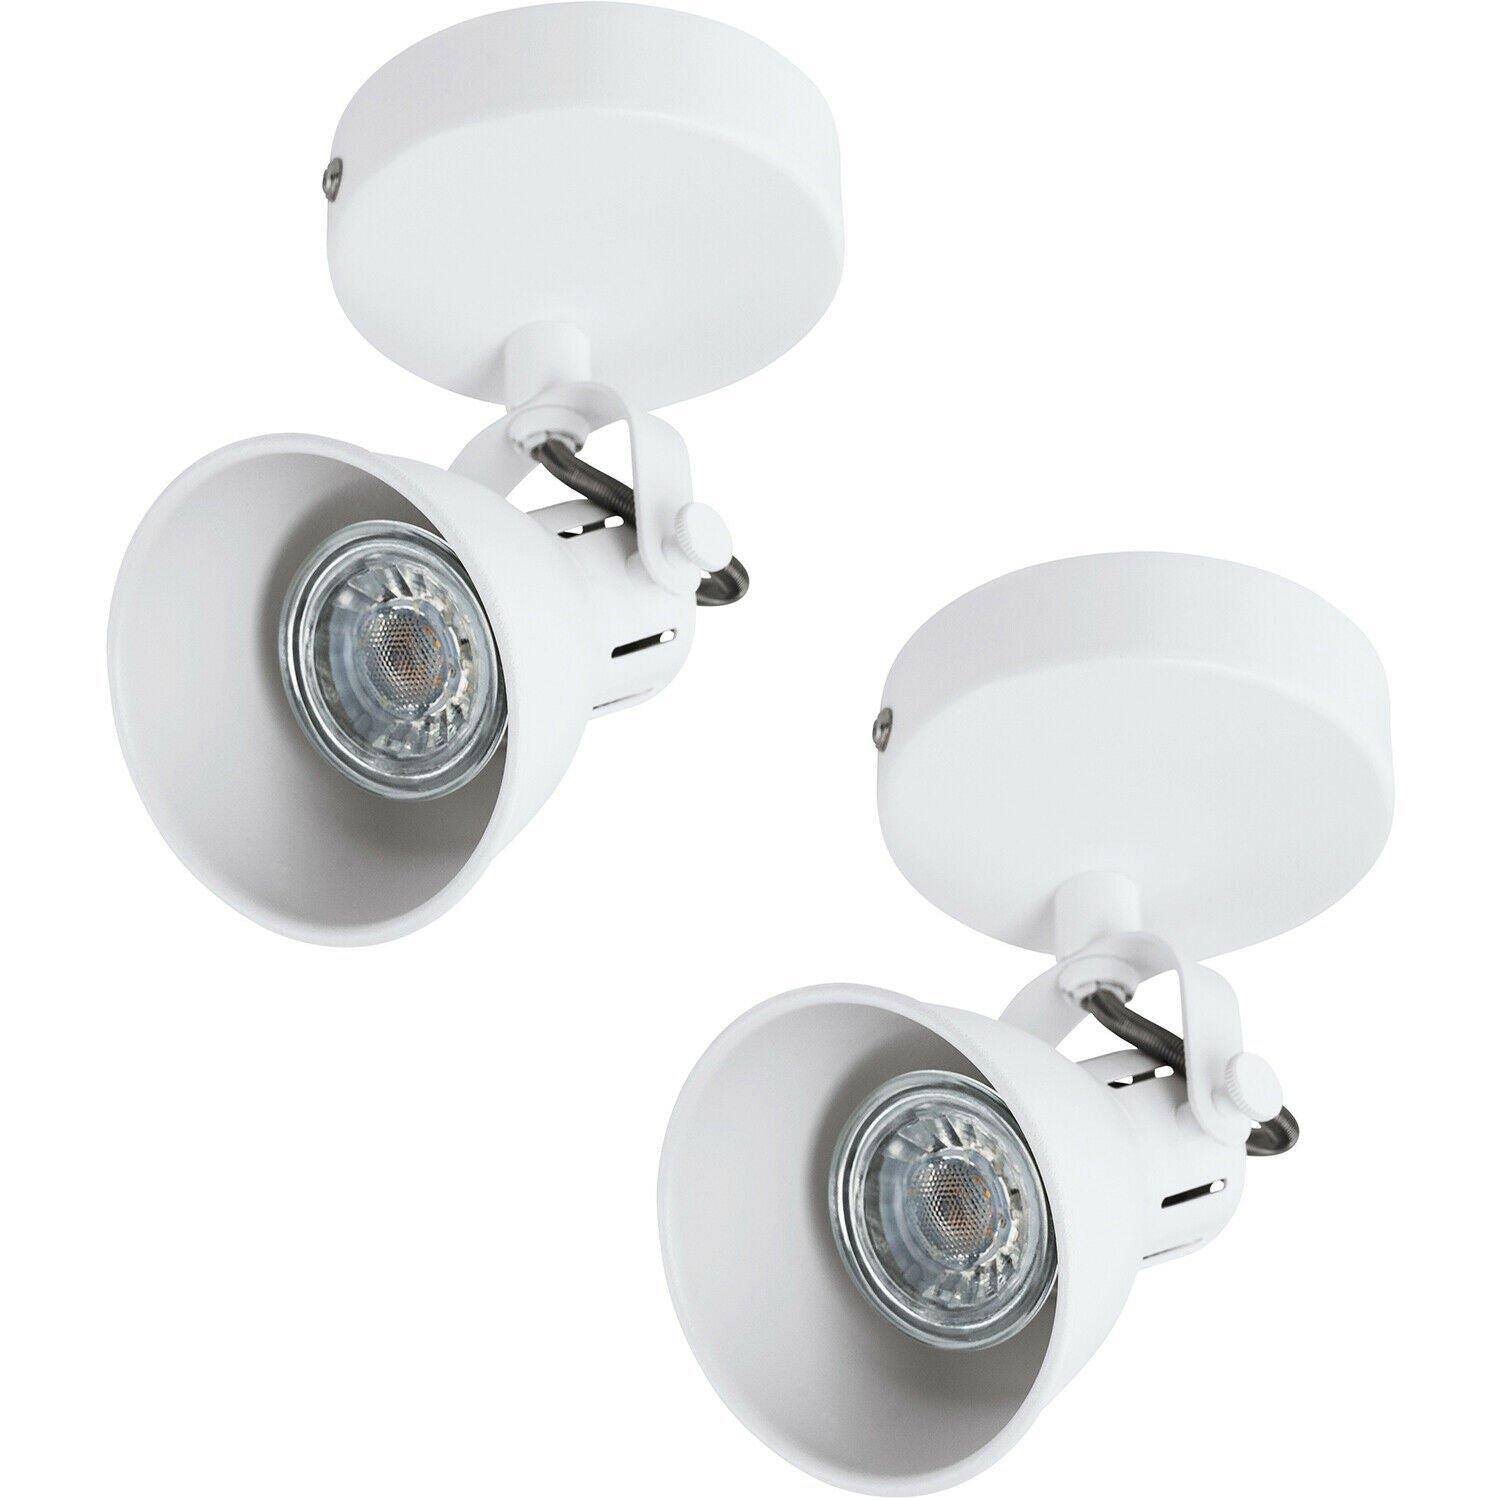 2 PACK Wall Spot Light White Steel Wall Plate and Lamp Shade GU10 3.3W Included